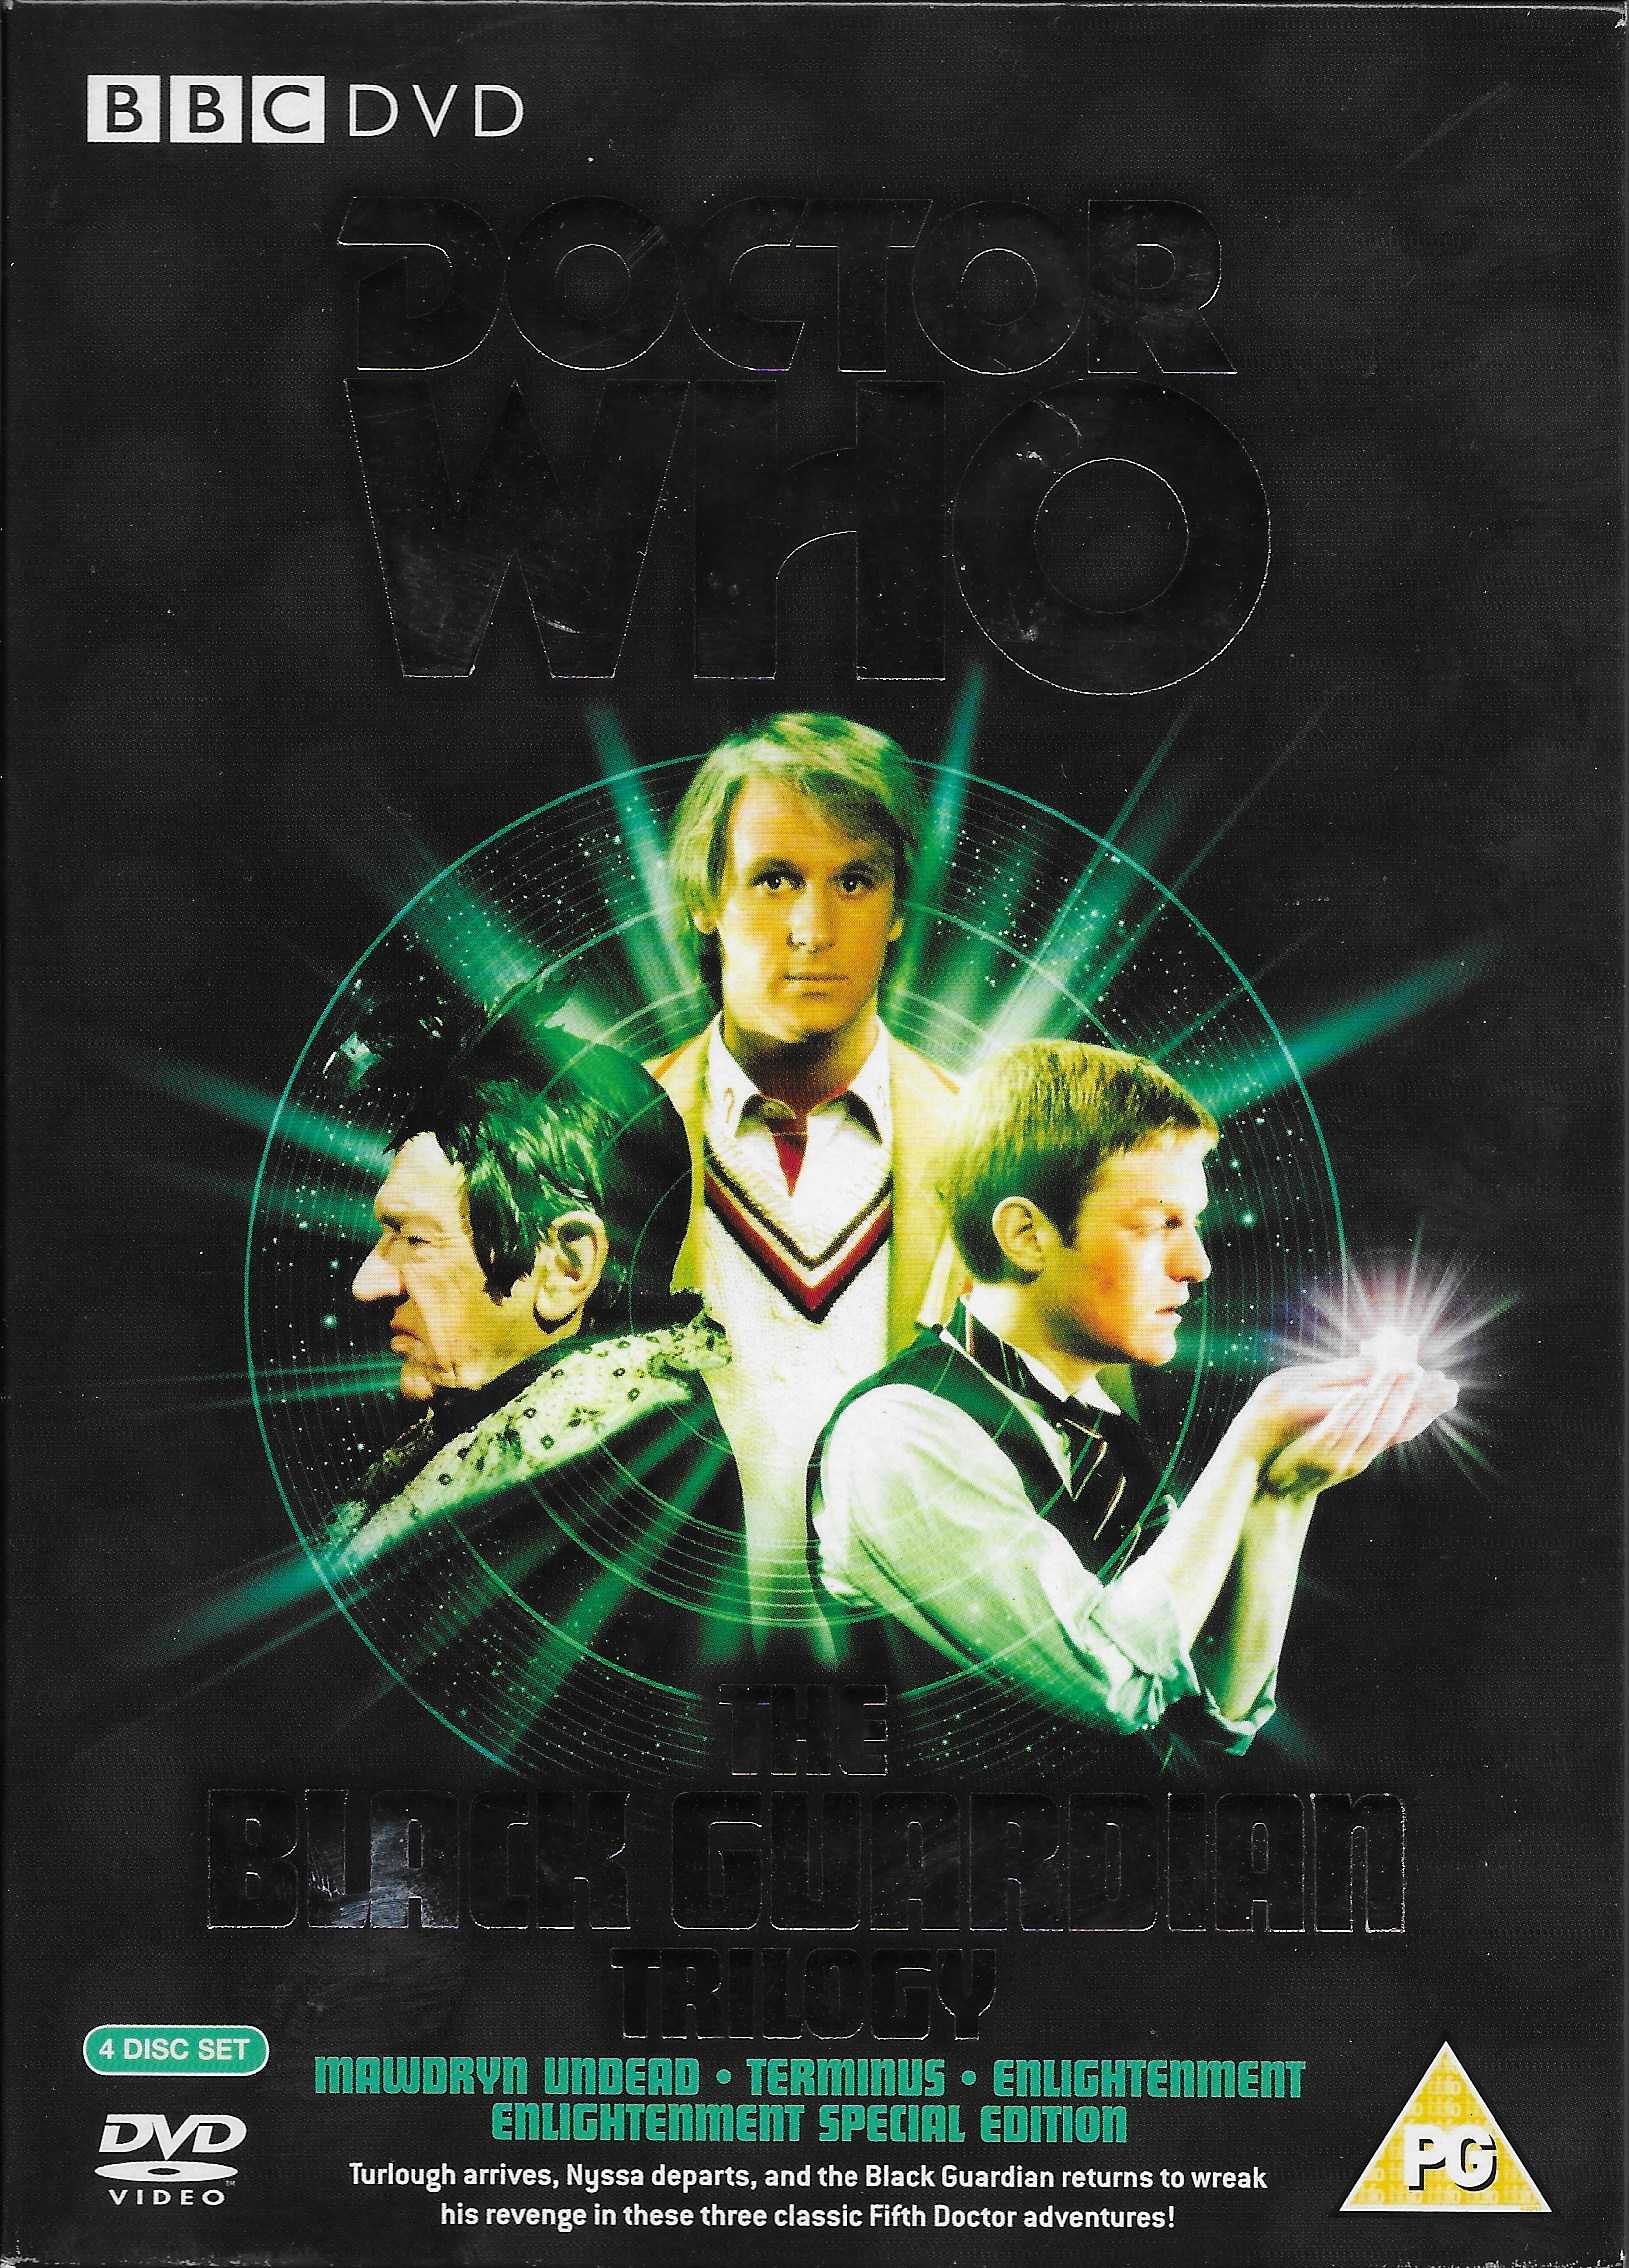 Picture of BBCDVD 2596 Doctor Who - The Black Guardian trilogy by artist Peter Grimwade / Steve Gallagher / Barbara Clegg from the BBC records and Tapes library